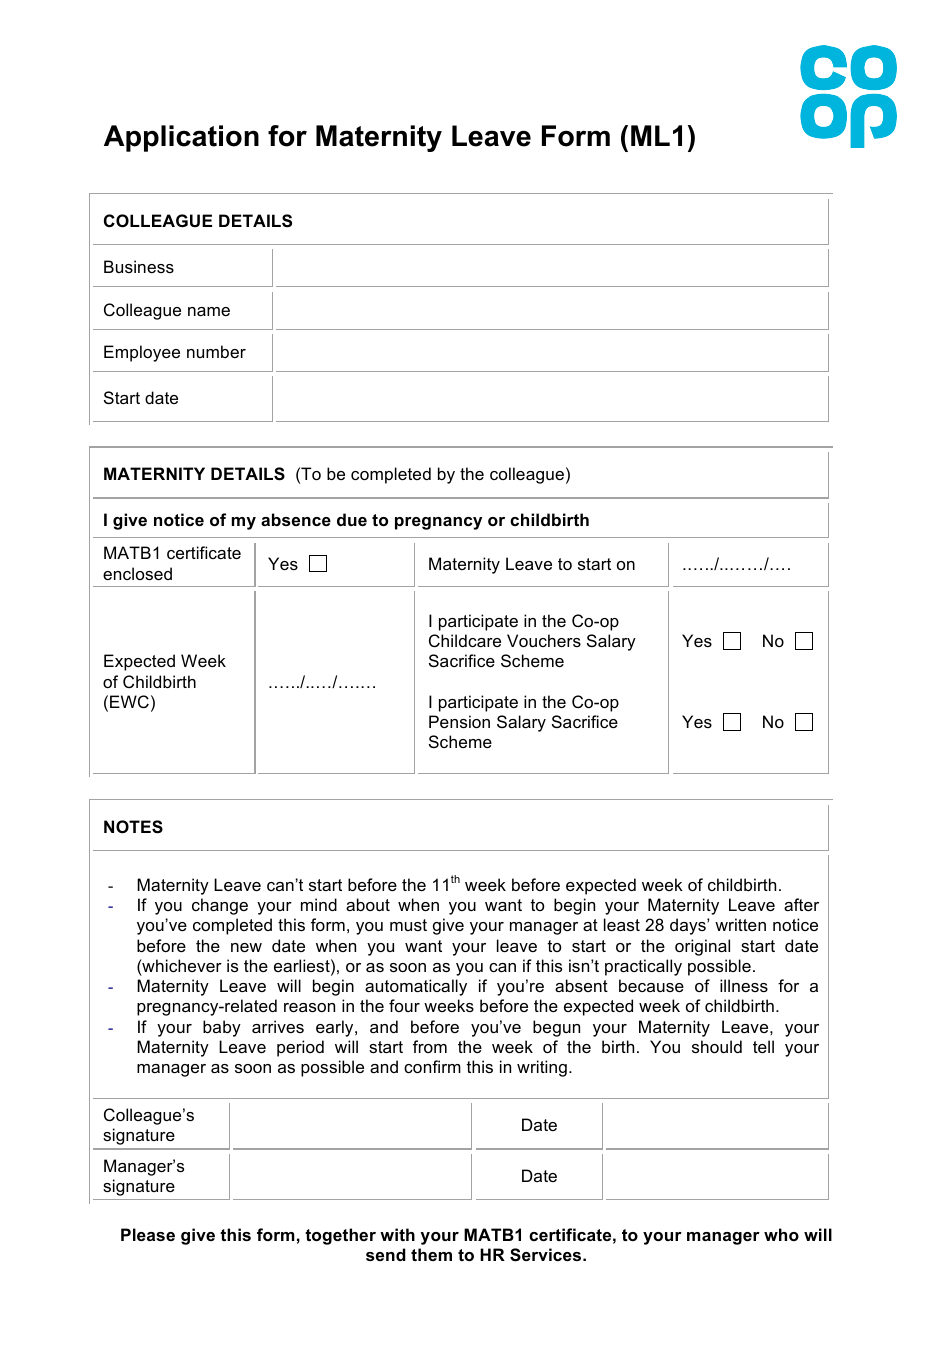 Application for Maternity Leave Form - Co-op, Page 1